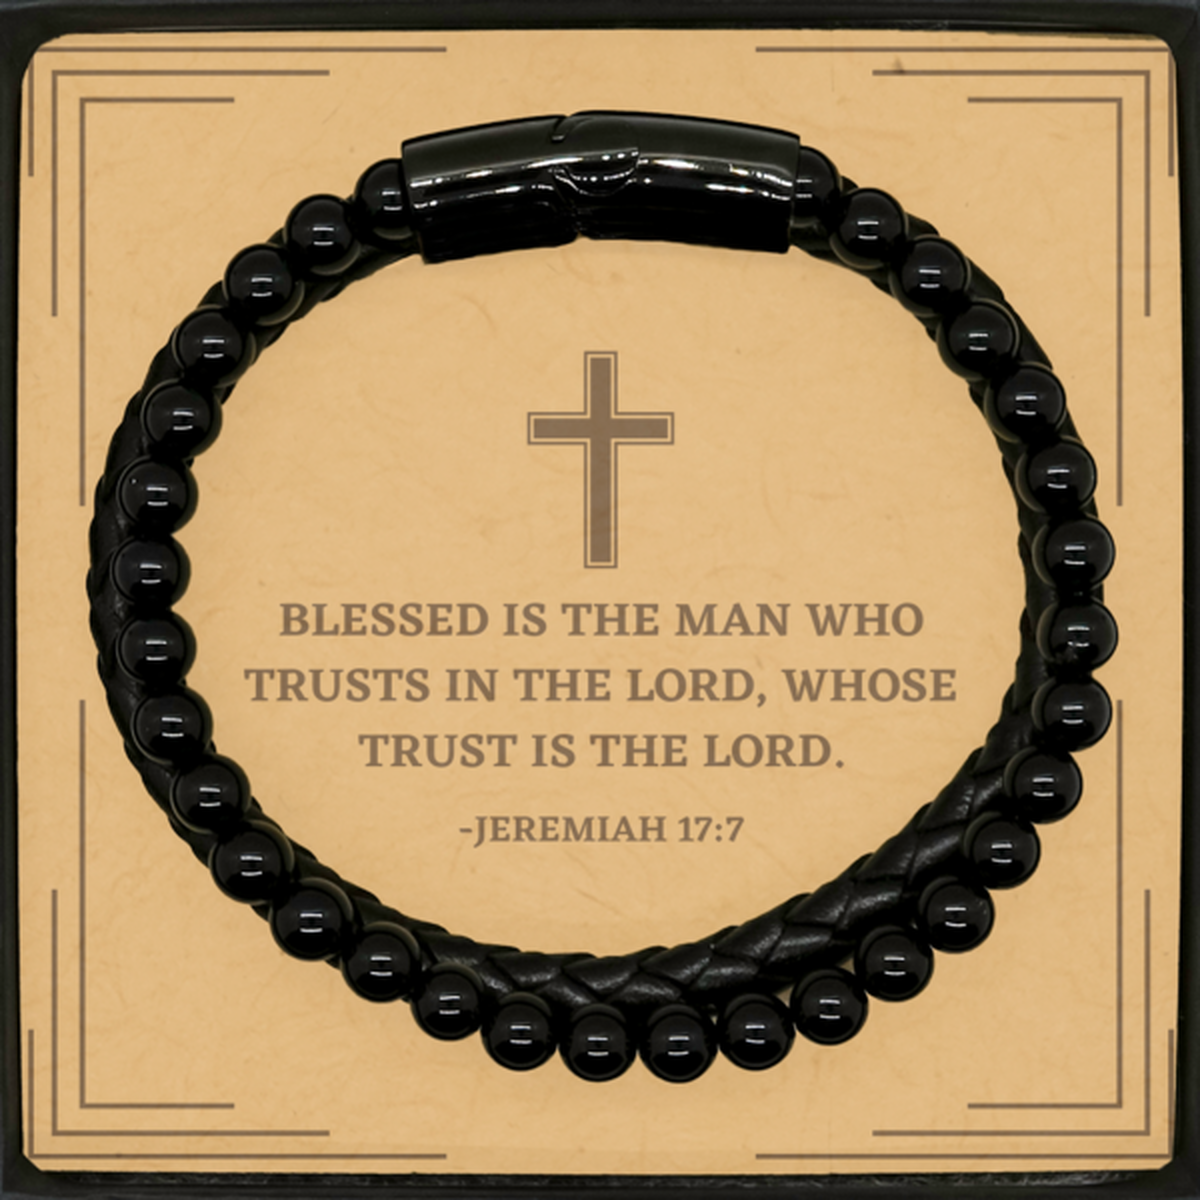 Baptism Gifts For Teenage Boys Girls, Christian Bible Verse Stone Leather Bracelet, Blessed is the man who trusts, Confirmation Gifts, Bible Verse Card for Son, Godson, Grandson